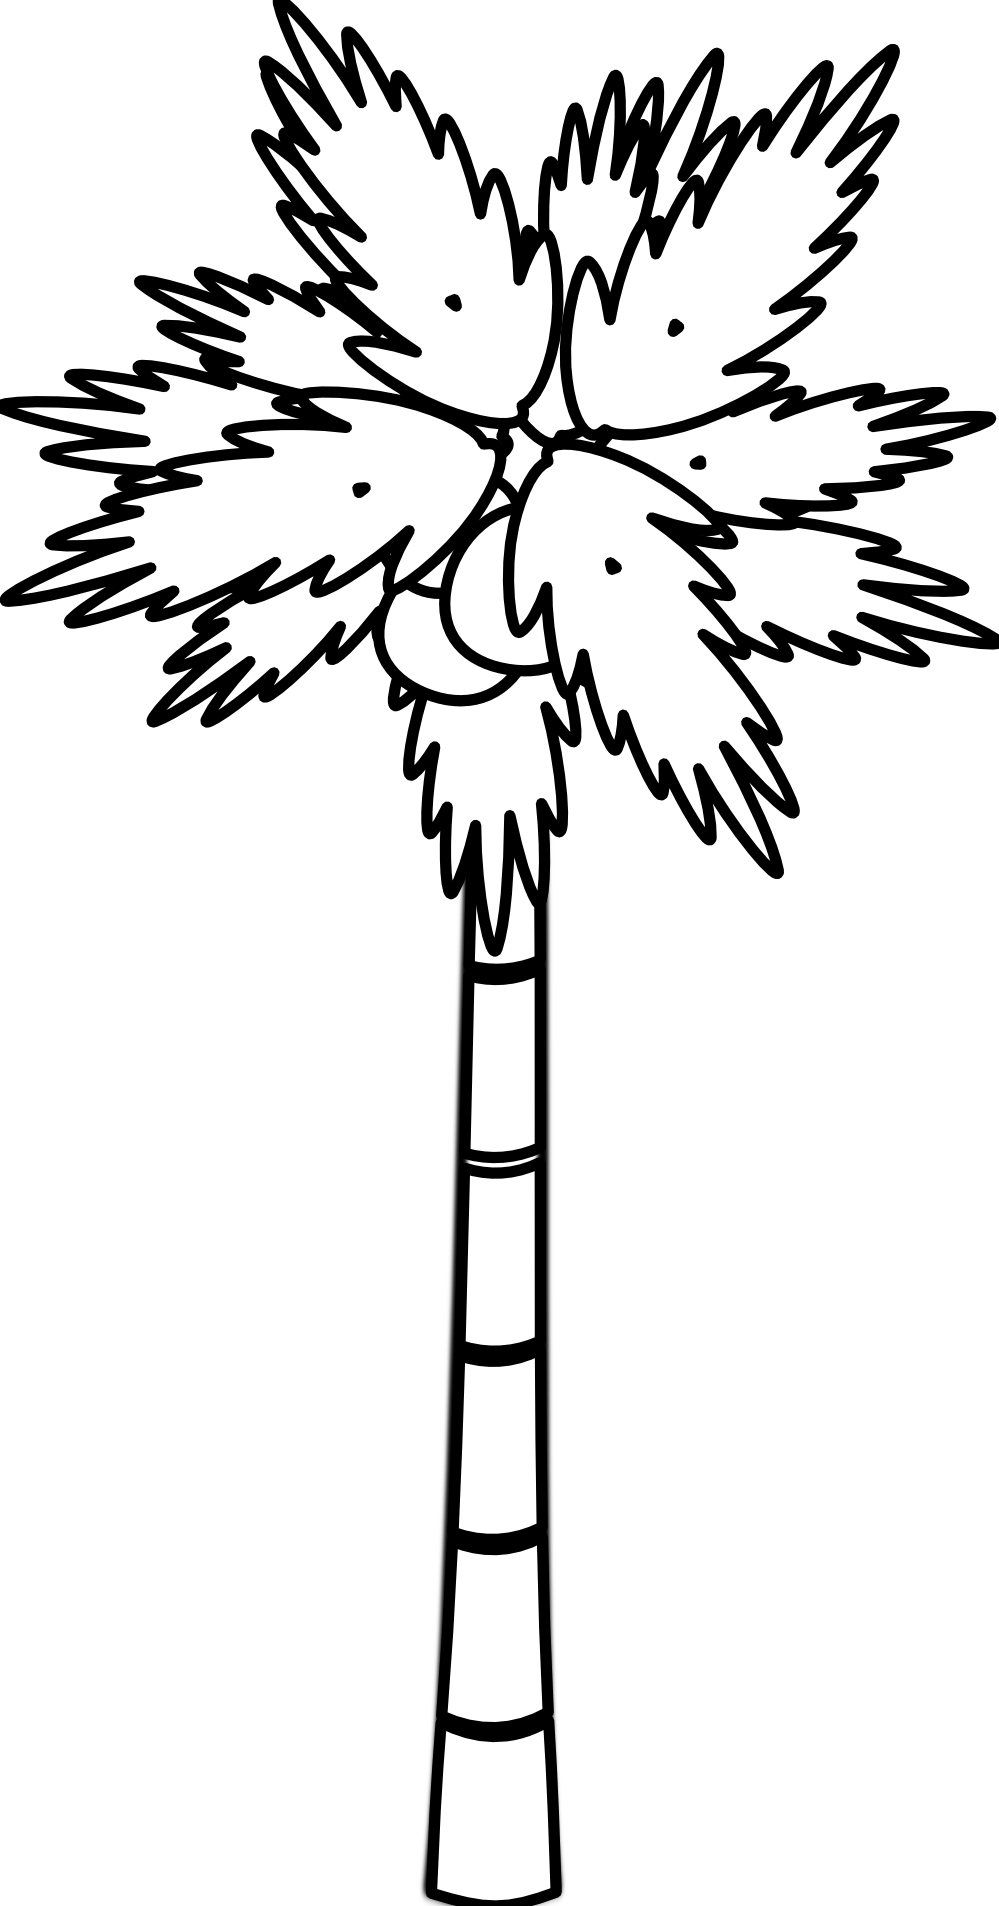 Coconut Tree Clipart Black And White - ClipArt Best